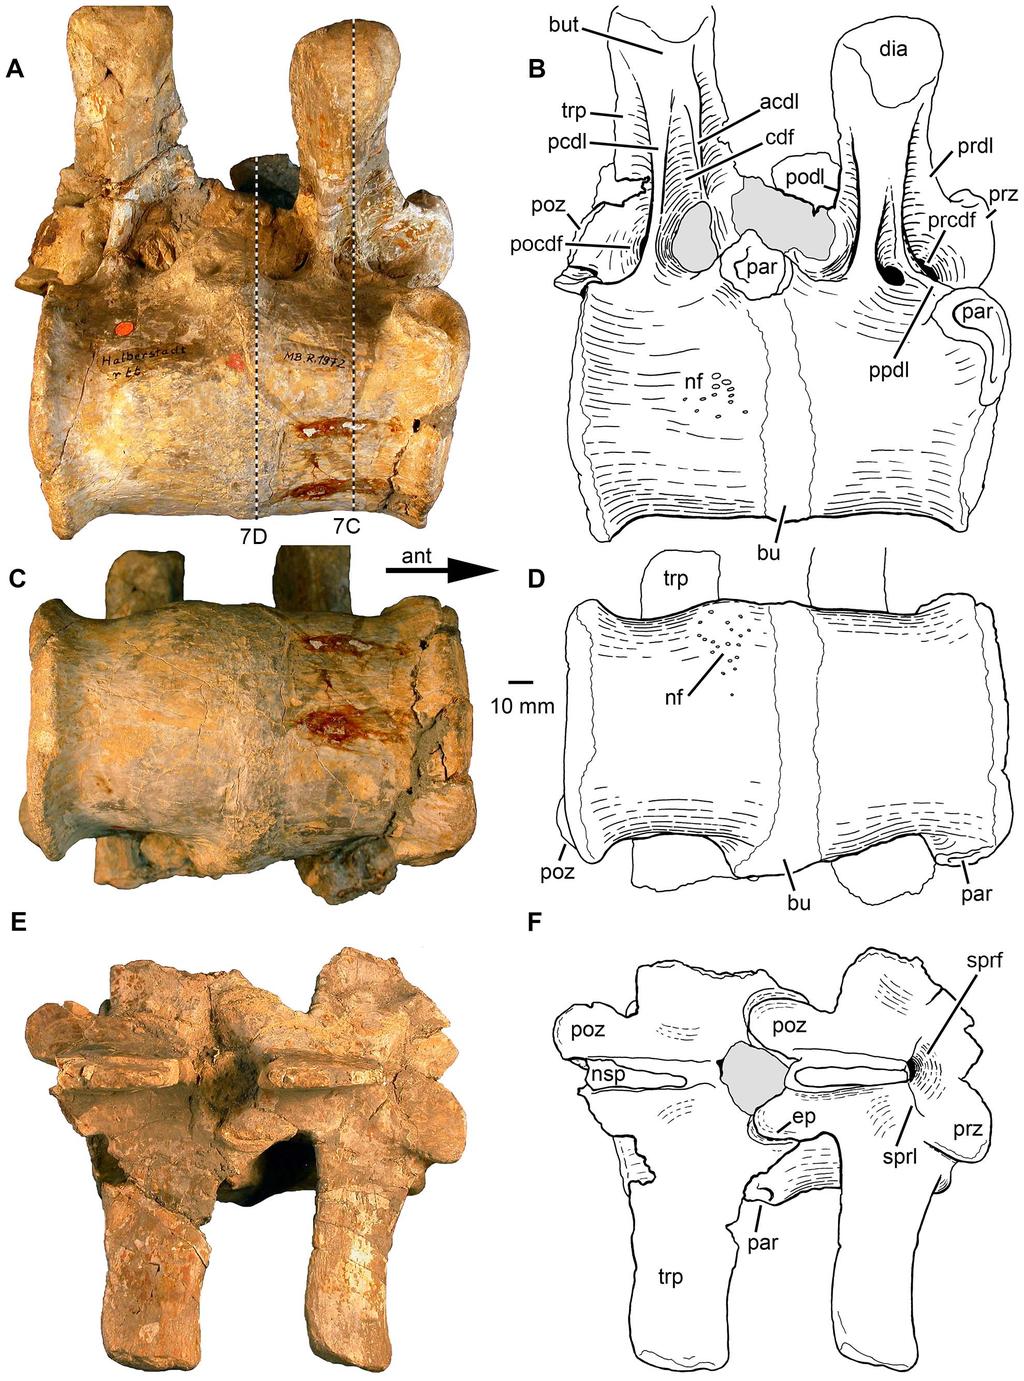 Figure 3. Phytosauria indet. from the Late Triassic of Halberstadt. Fused vertebrae MB.R.1972 derived from the thoracic region. A, B. Right lateral view. C, D. Ventral view. E, F. Dorsal view.